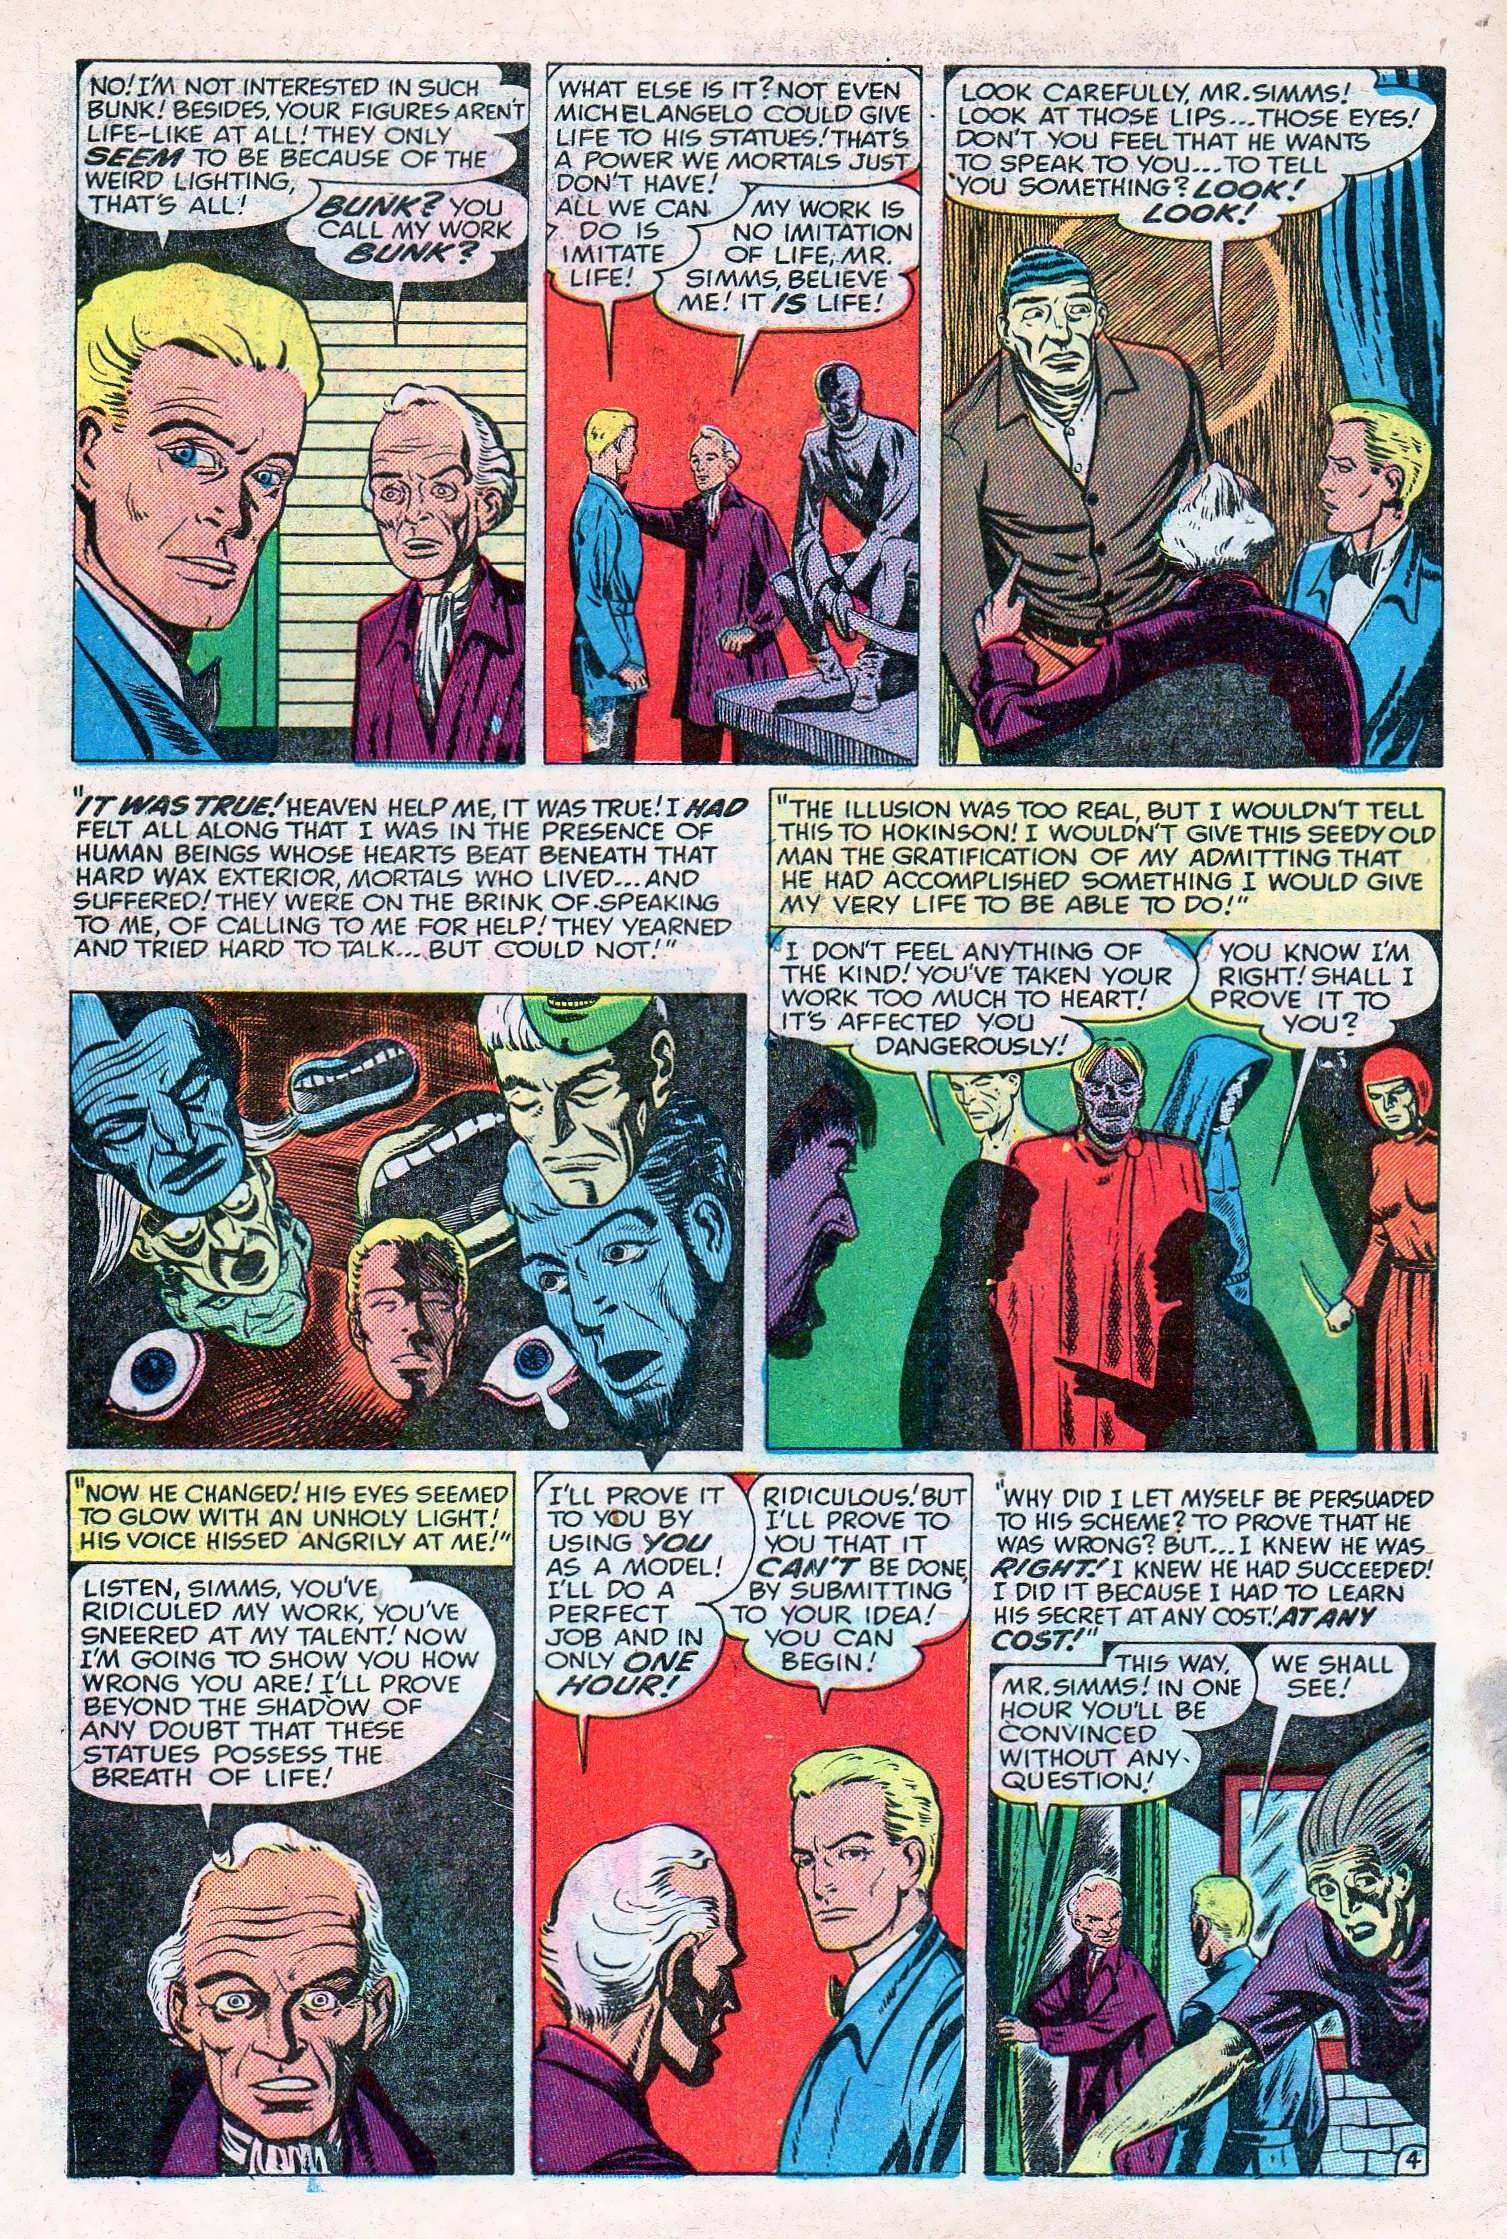 Marvel Tales (1949) 99 Page 5